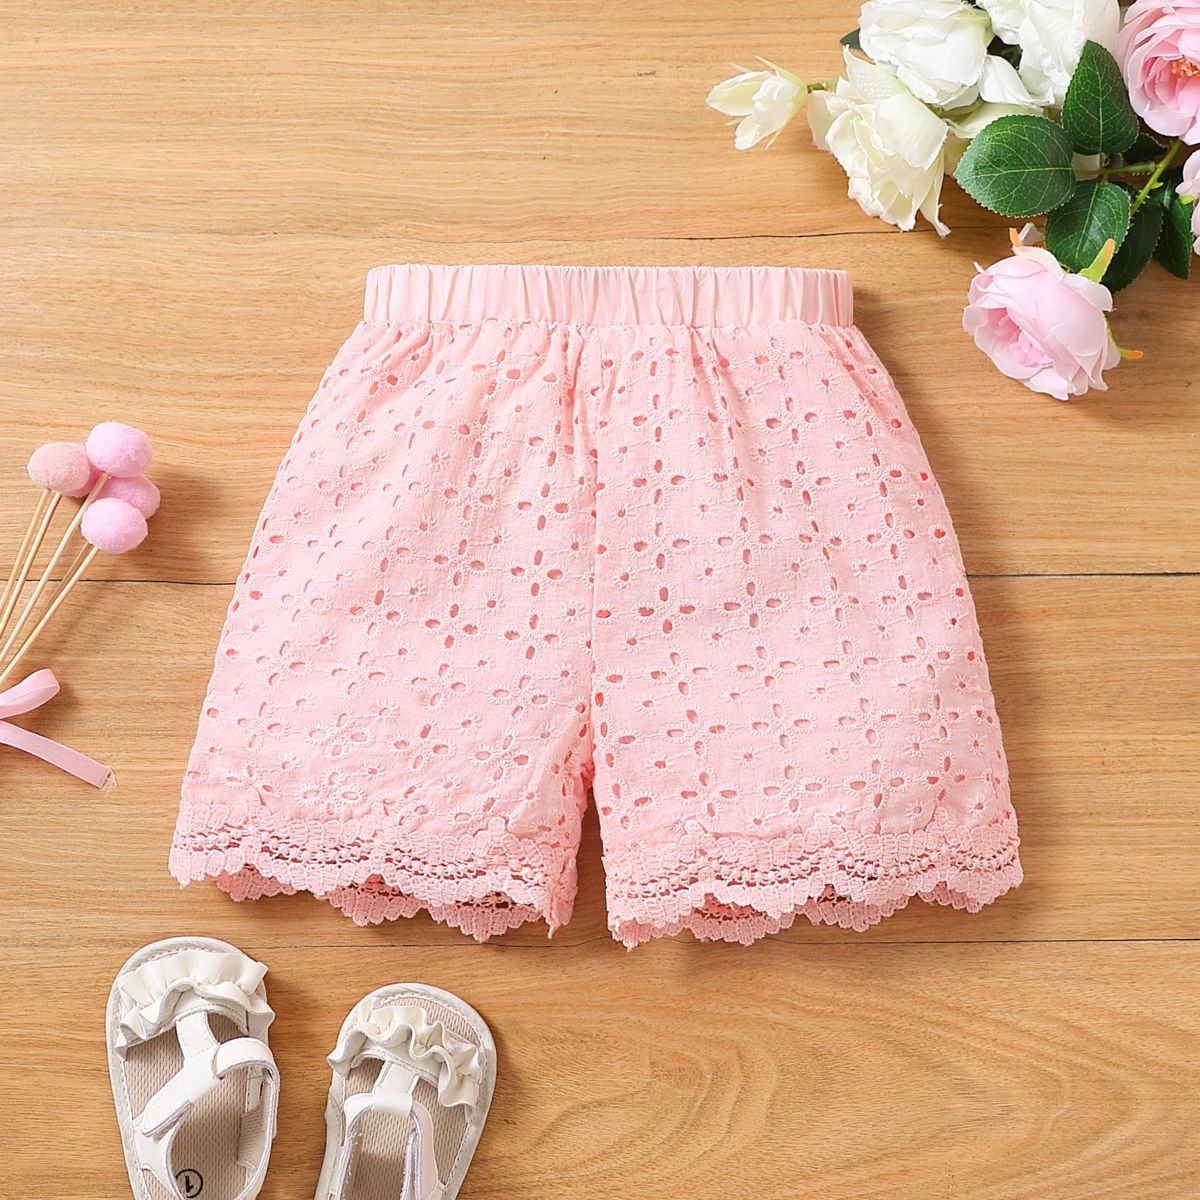 Toddler Girl 100% Cotton Lace Trim Schiffy Shorts